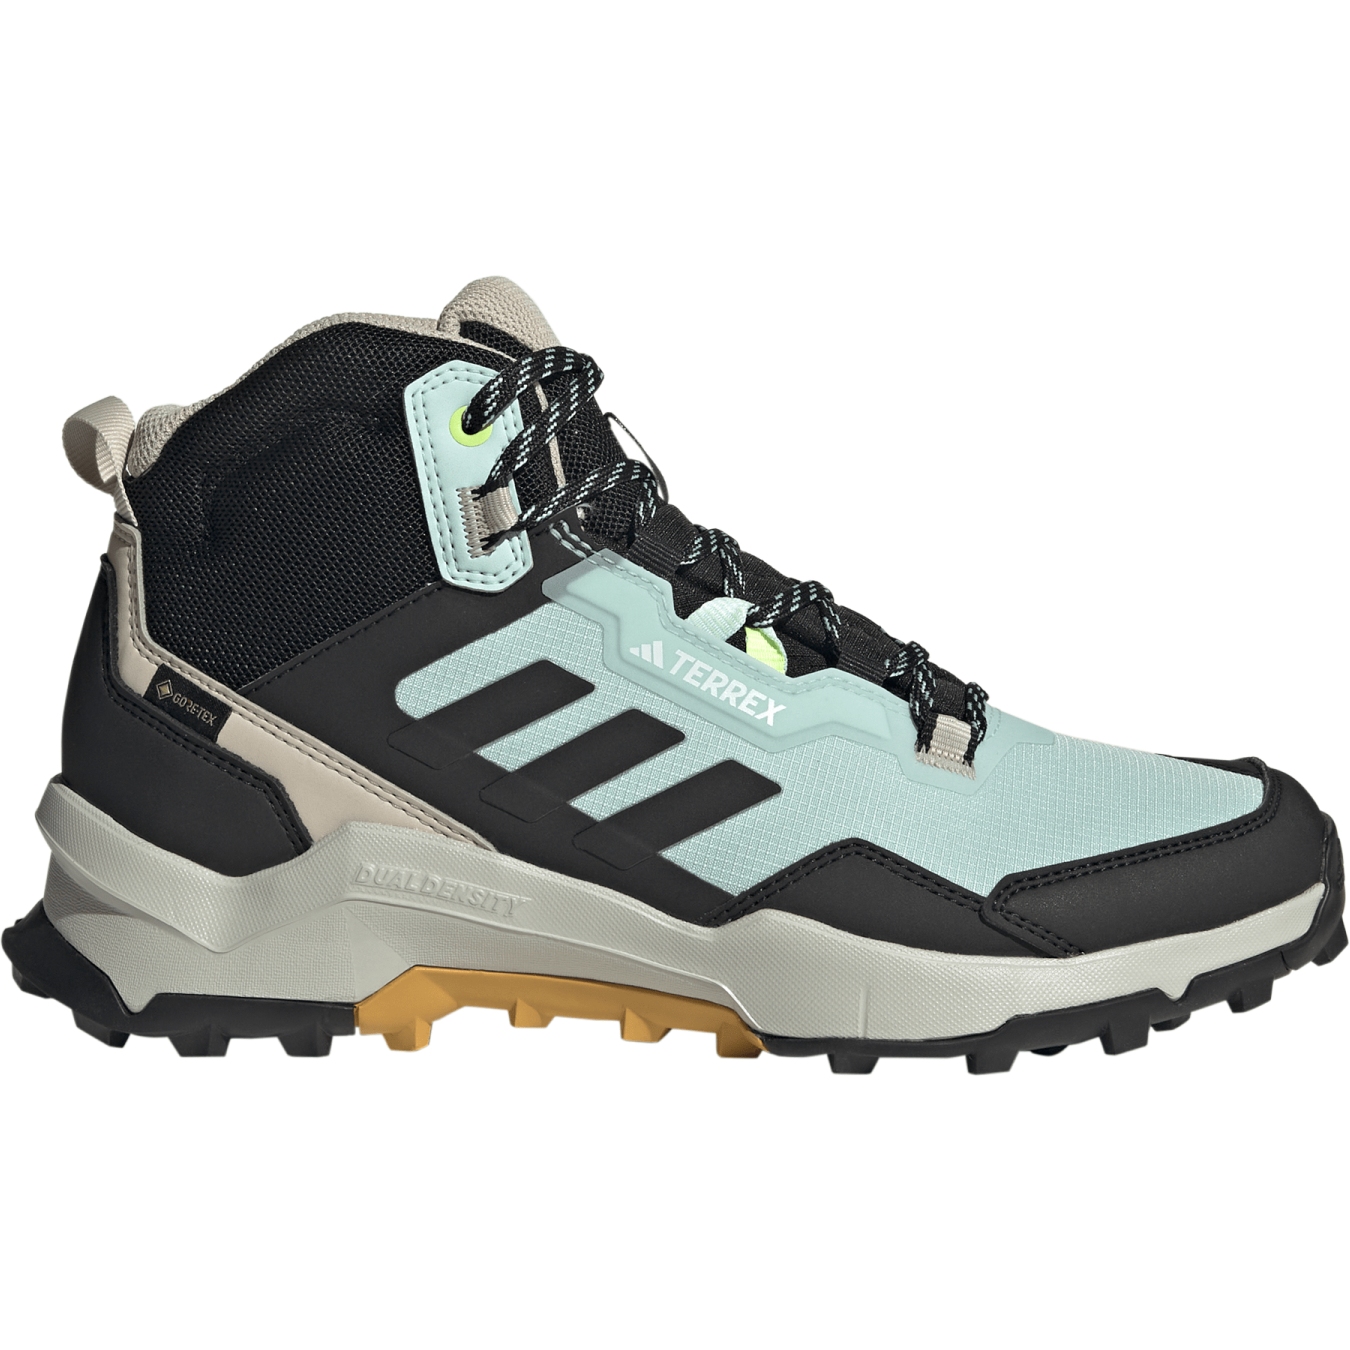 Picture of adidas TERREX AX4 Mid GORE-TEX Hiking Shoes Women - seflaq/core black/pre yellow IF4850